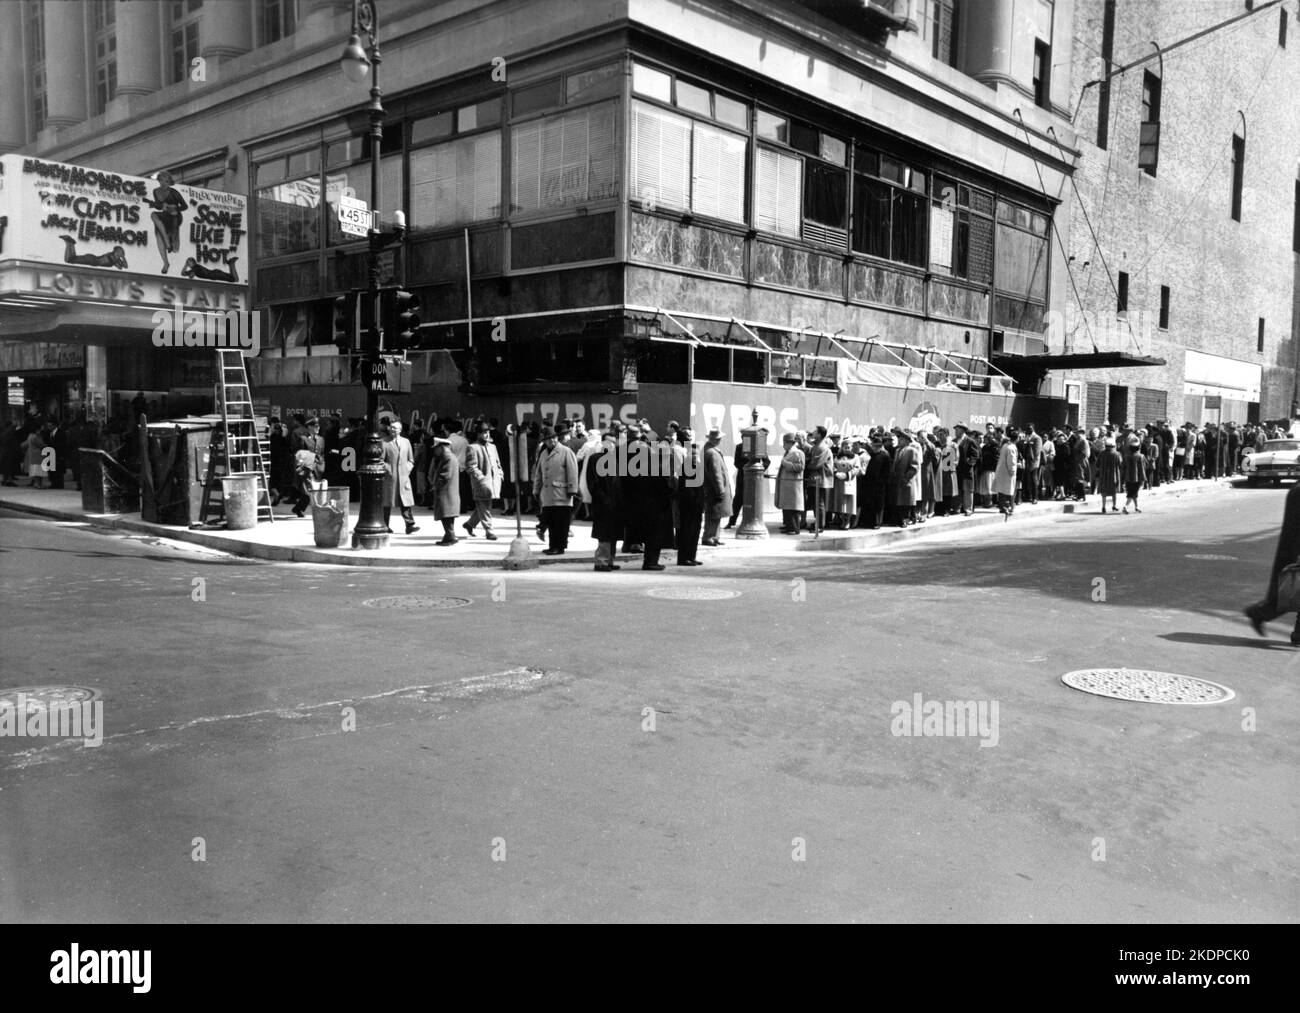 Loew's State Movie Theatre in New York City in March 1959 with queue to see MARILYN MONROE TONY CURTIS and JACK LEMMON in SOME LIKE IT HOT 1959 director BILLY WILDER screenplay Billy Wilder and I.A.L. Diamond Ashton Productions / The Mirisch Corporation / United Artists Stock Photo